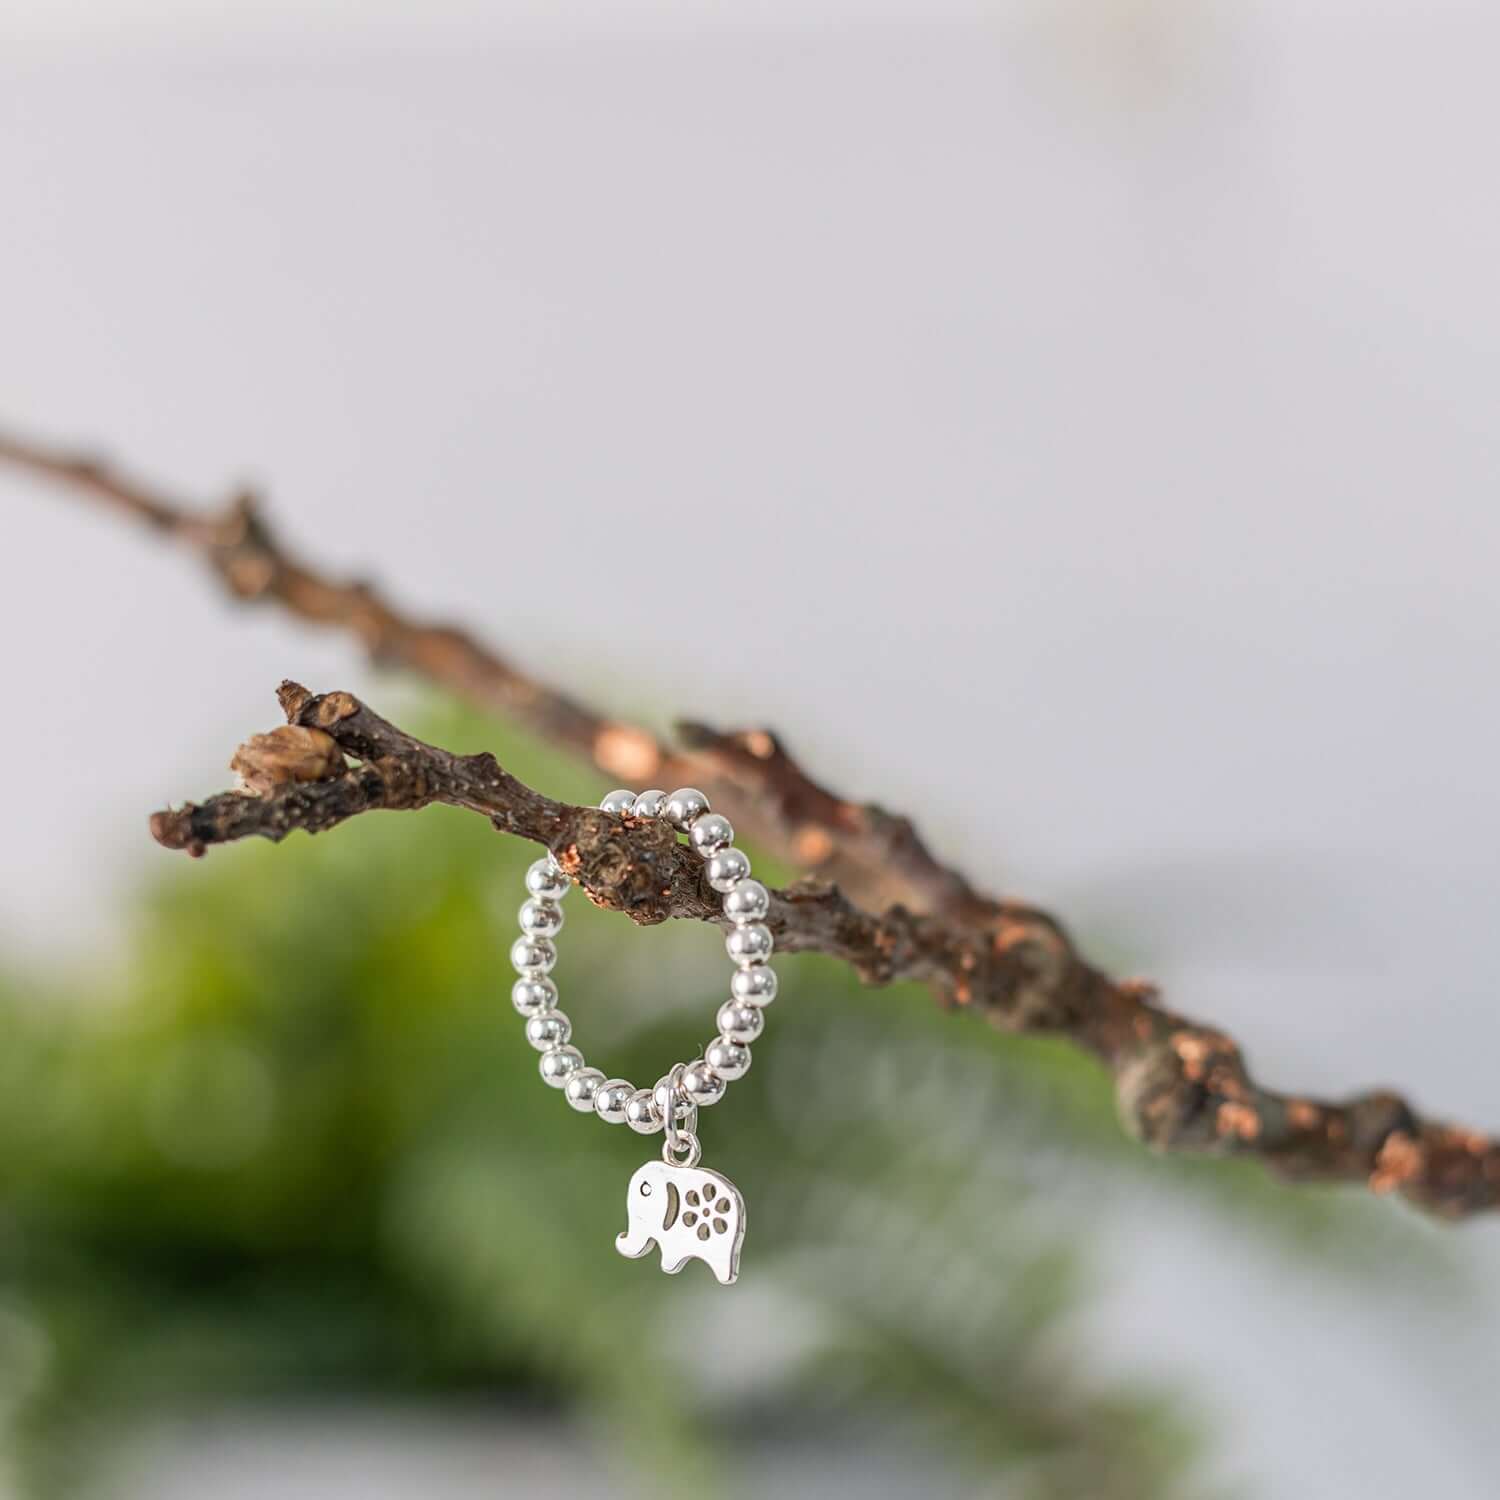 A silver beaded charm ring with an elephant charm hangs delicately on a twig. The branch, with a rustic texture, contrasts with the polished metal of the ring. The background is softly blurred, featuring green foliage and creating a serene natural setting